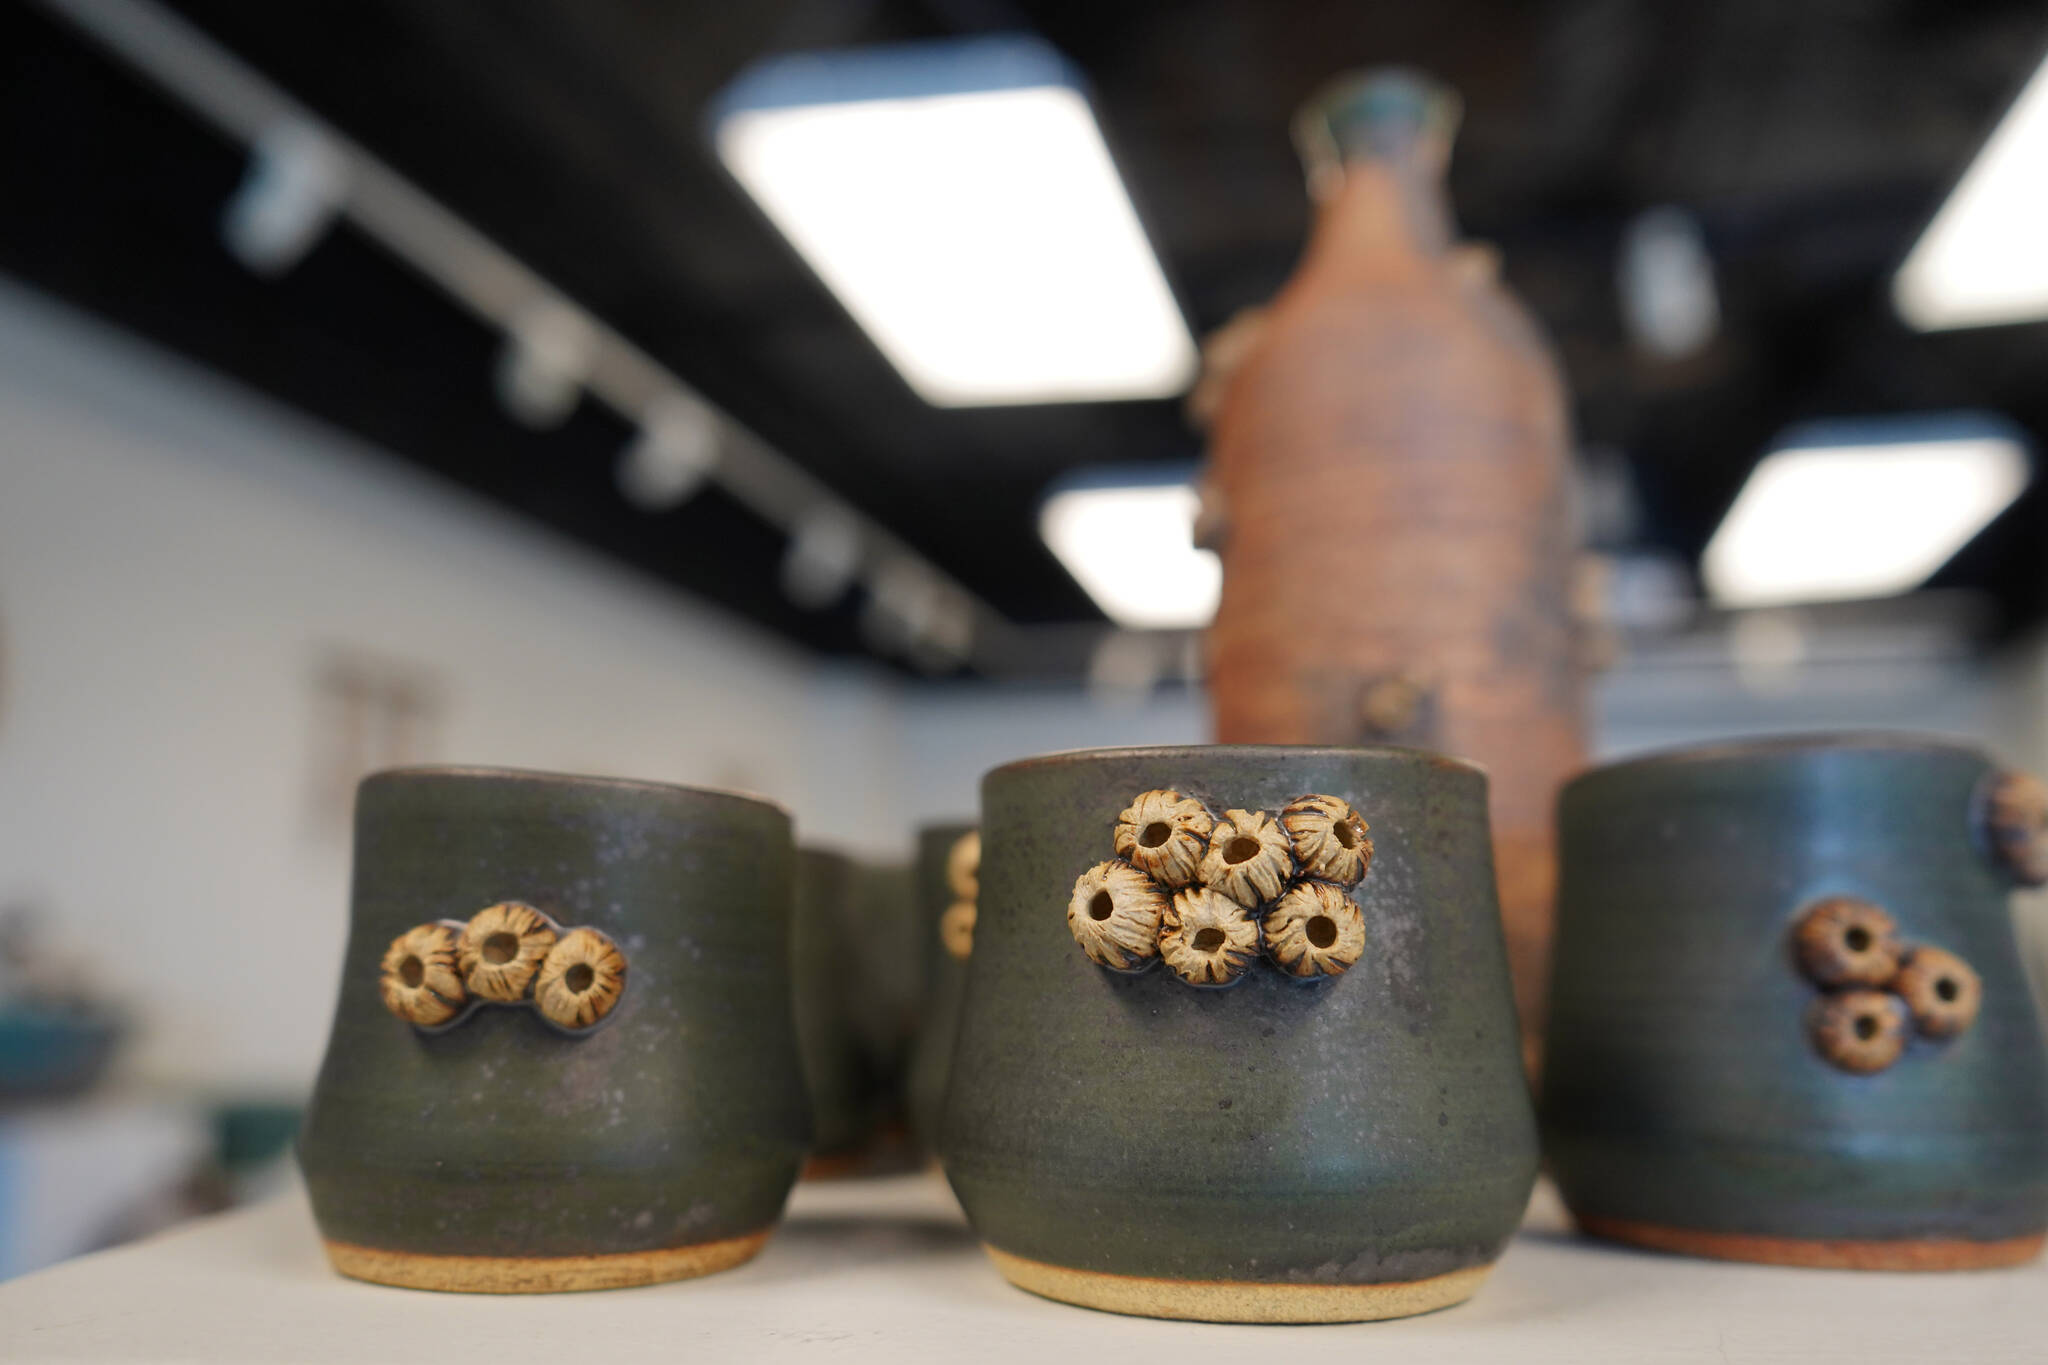 “Barnacle Bob’s Bottle with Cups,” by Shannon Olds, is seen as part of Clay on Display at the Kenai Art Center in Kenai, Alaska, on Wednesday, July 12, 2023. (Jake Dye/Peninsula Clarion)